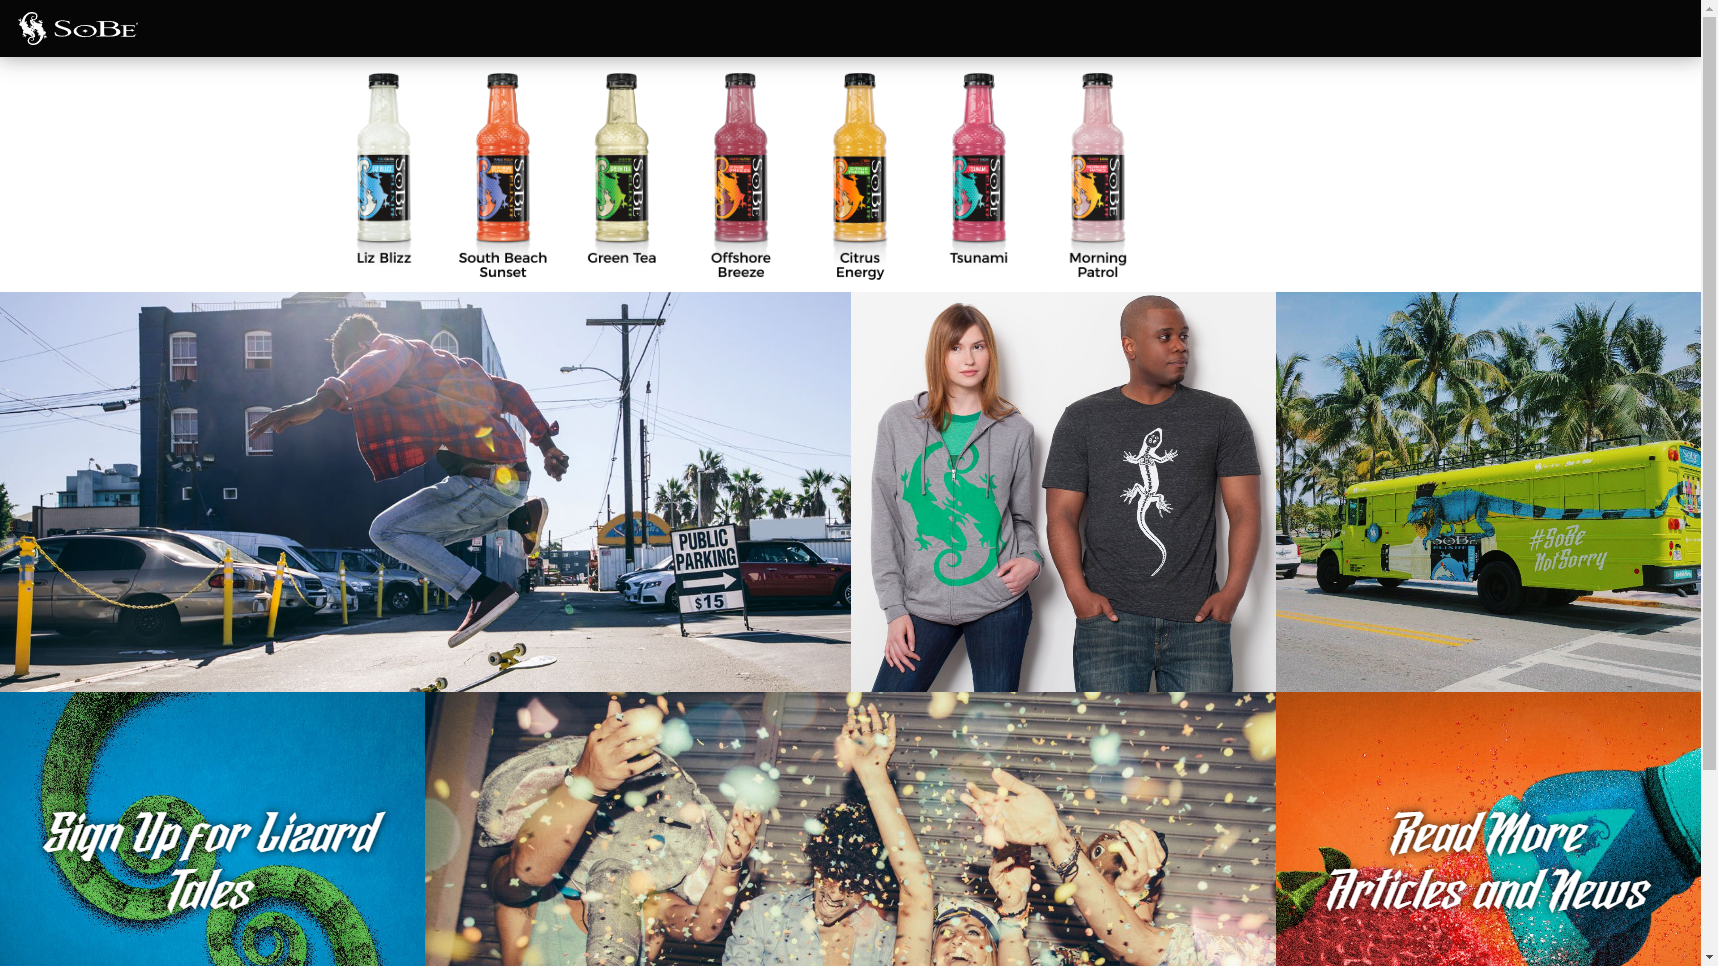 South Beach Beverage Company - Flavored Water Manufacturer